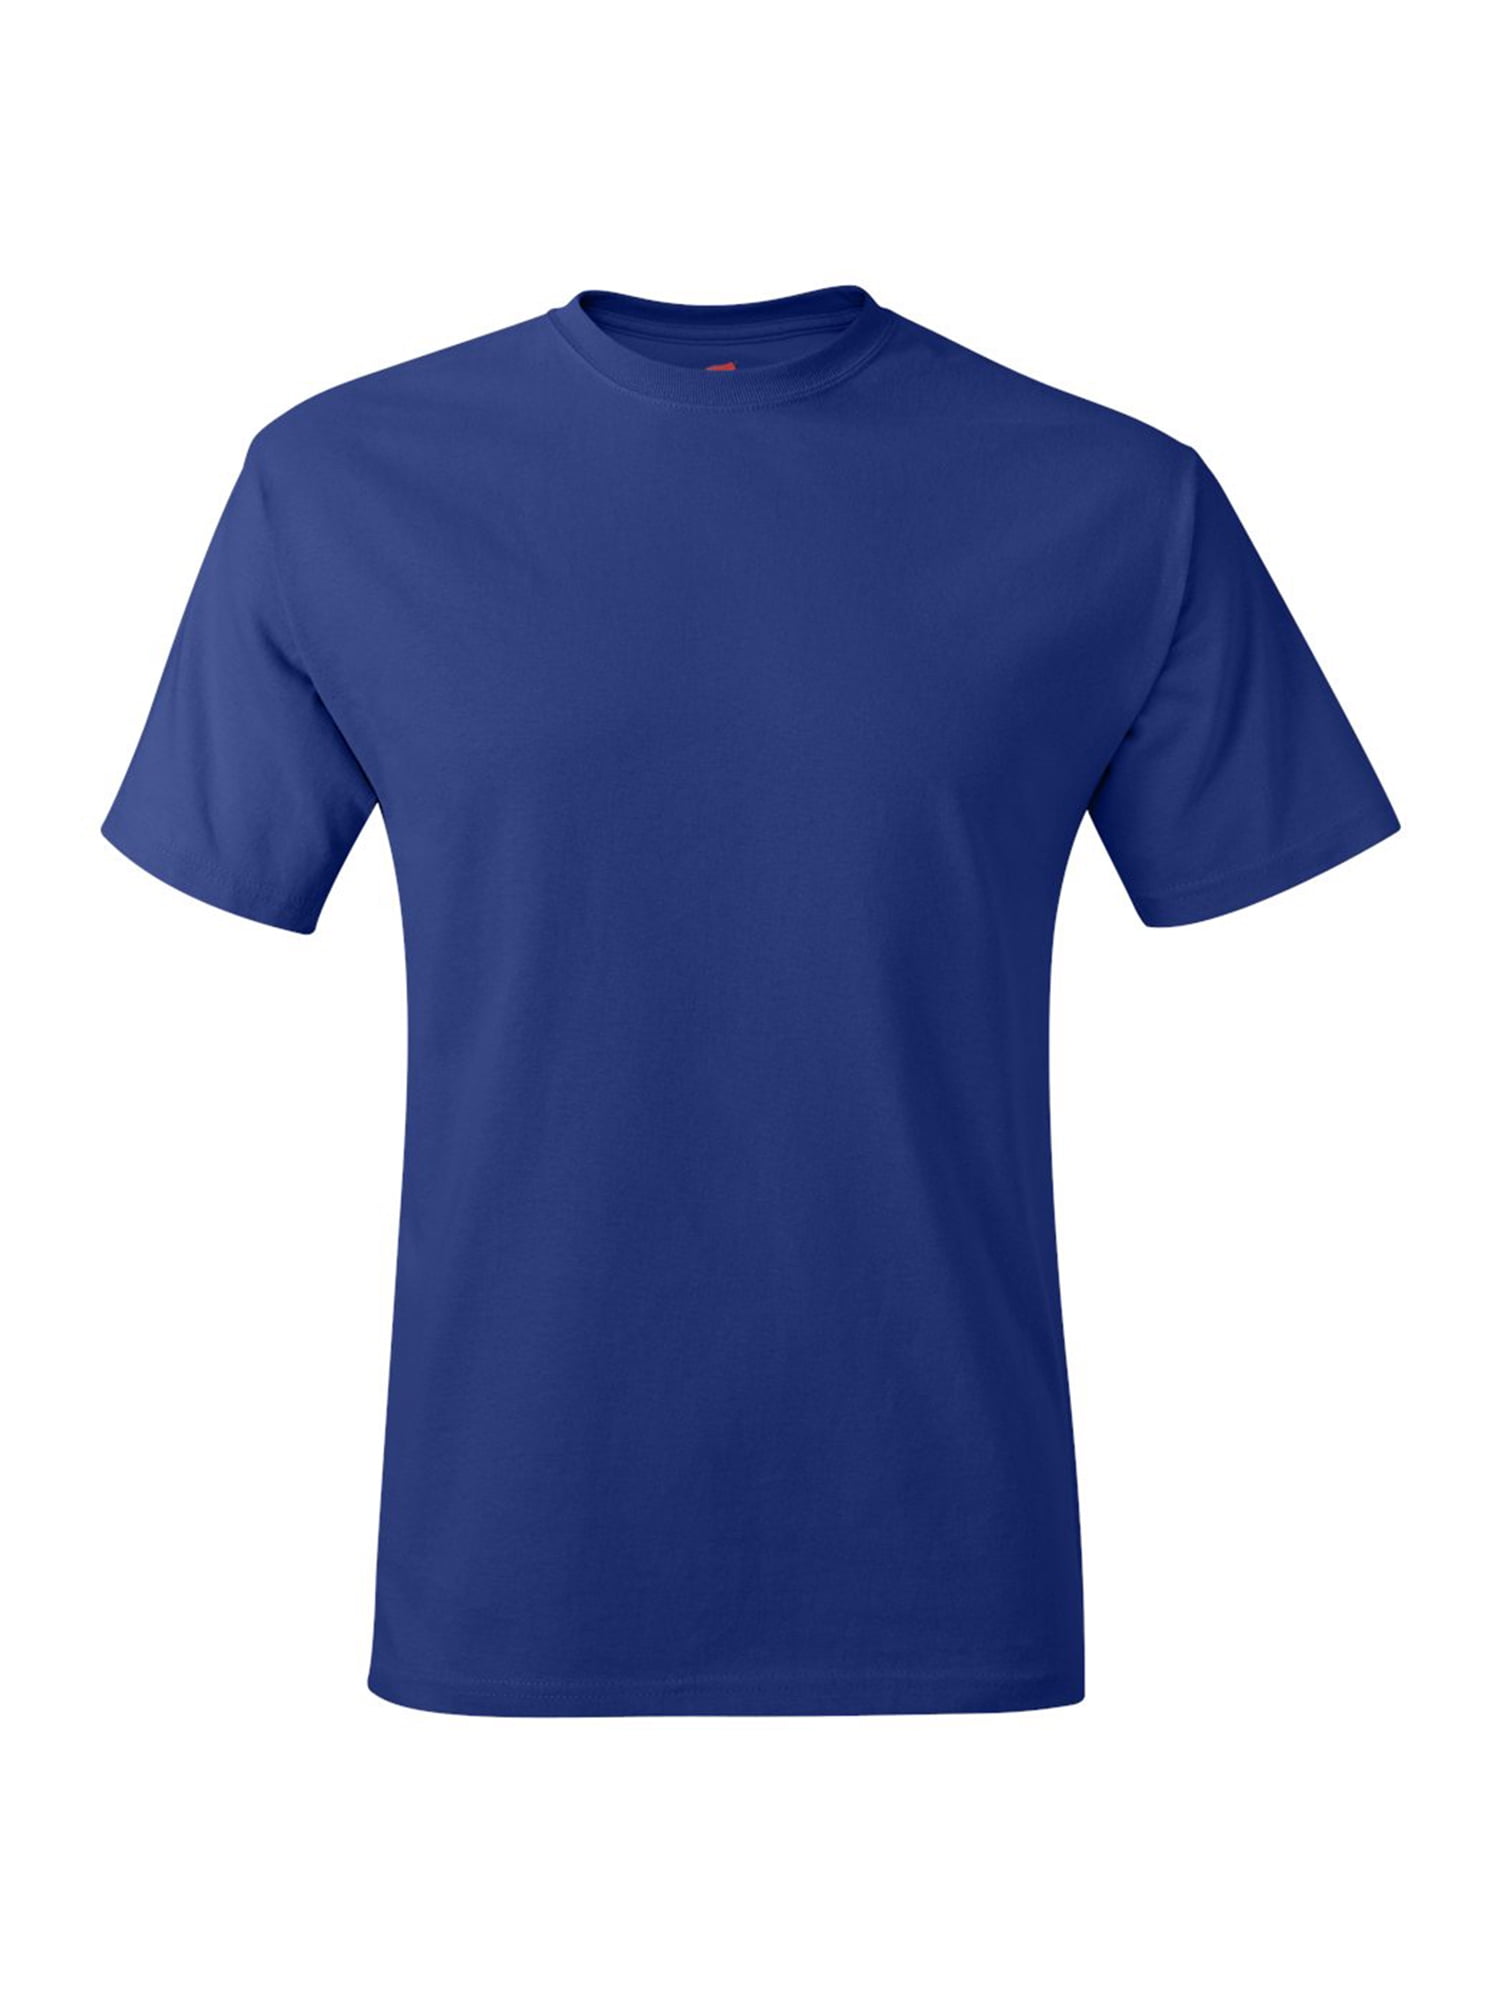 Buy > cheap plain colored t shirts > in stock